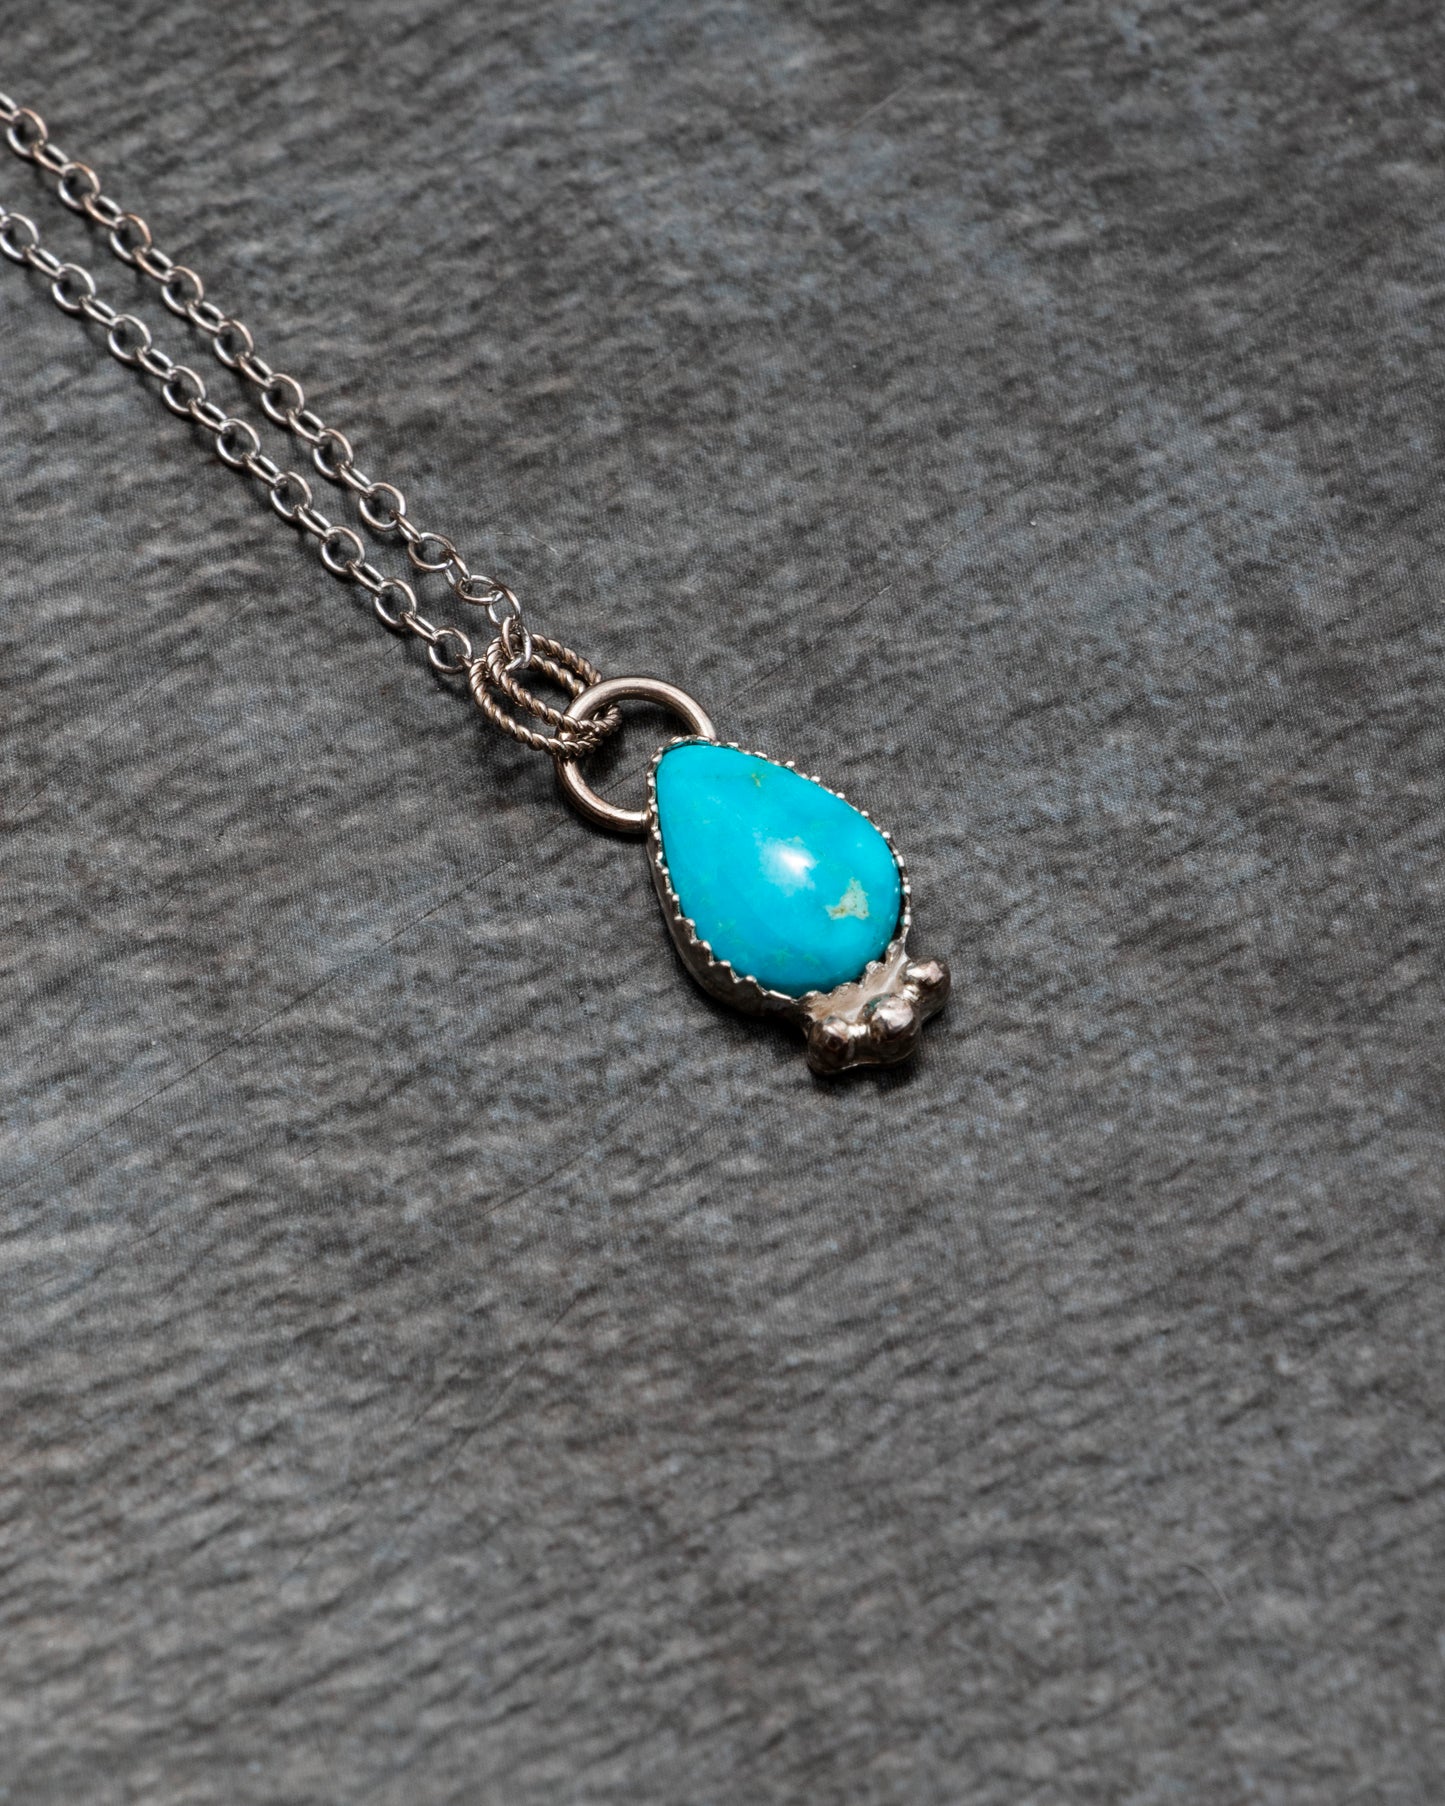 Blue Ridge Turquoise Necklace with Hand-Forged Silver Accent Beads